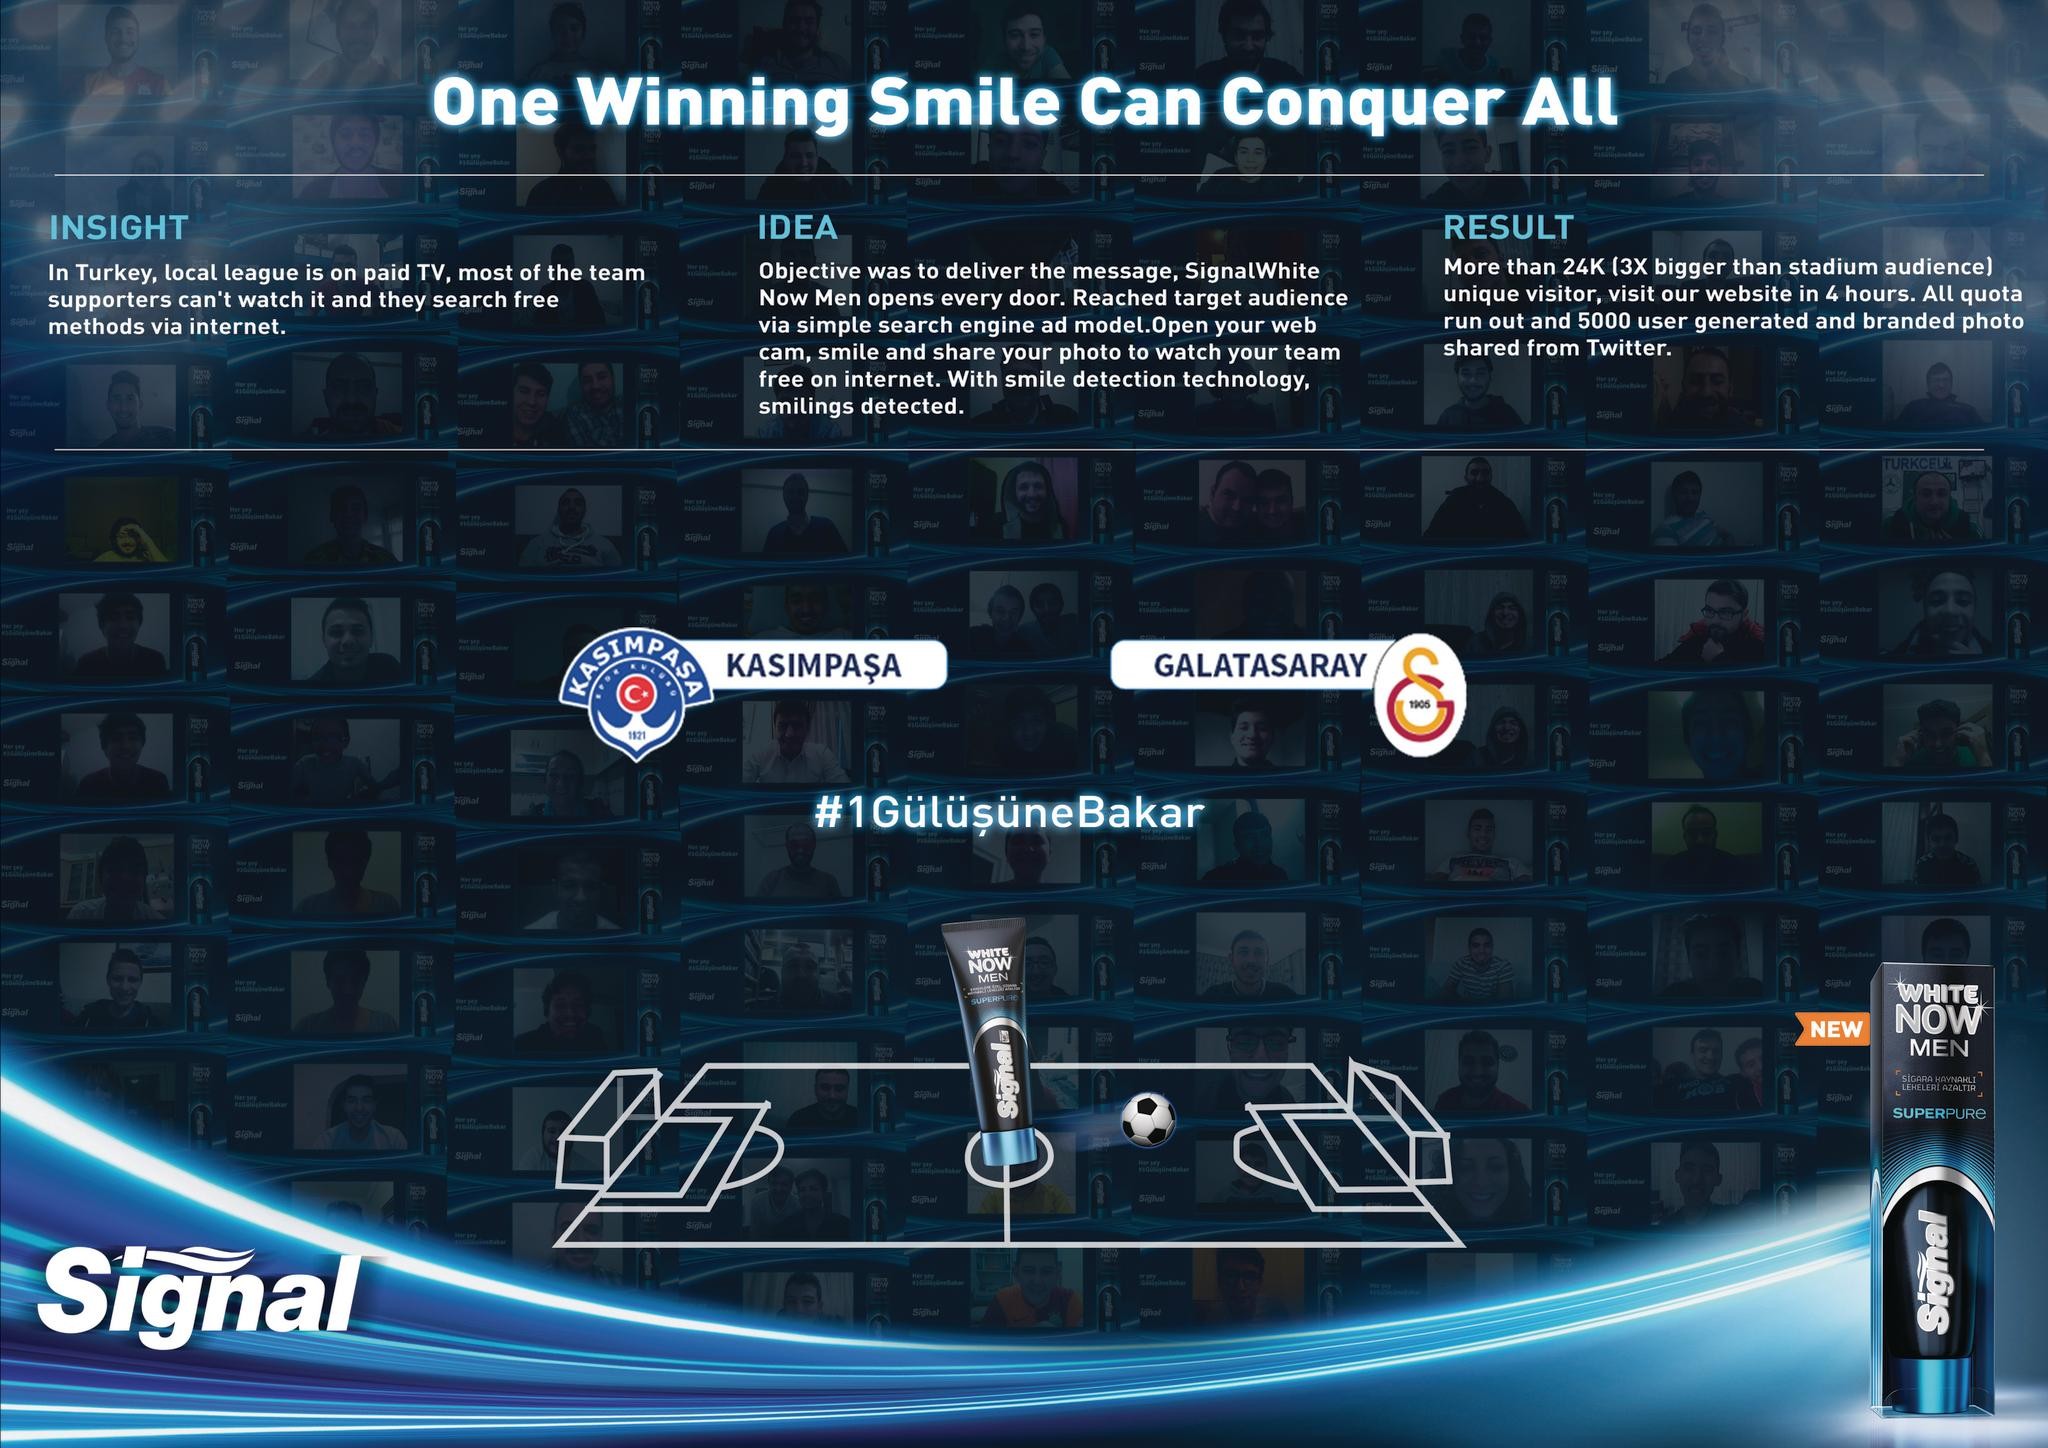 'ONE WINNING SMILE CAN CONQUER ALL'